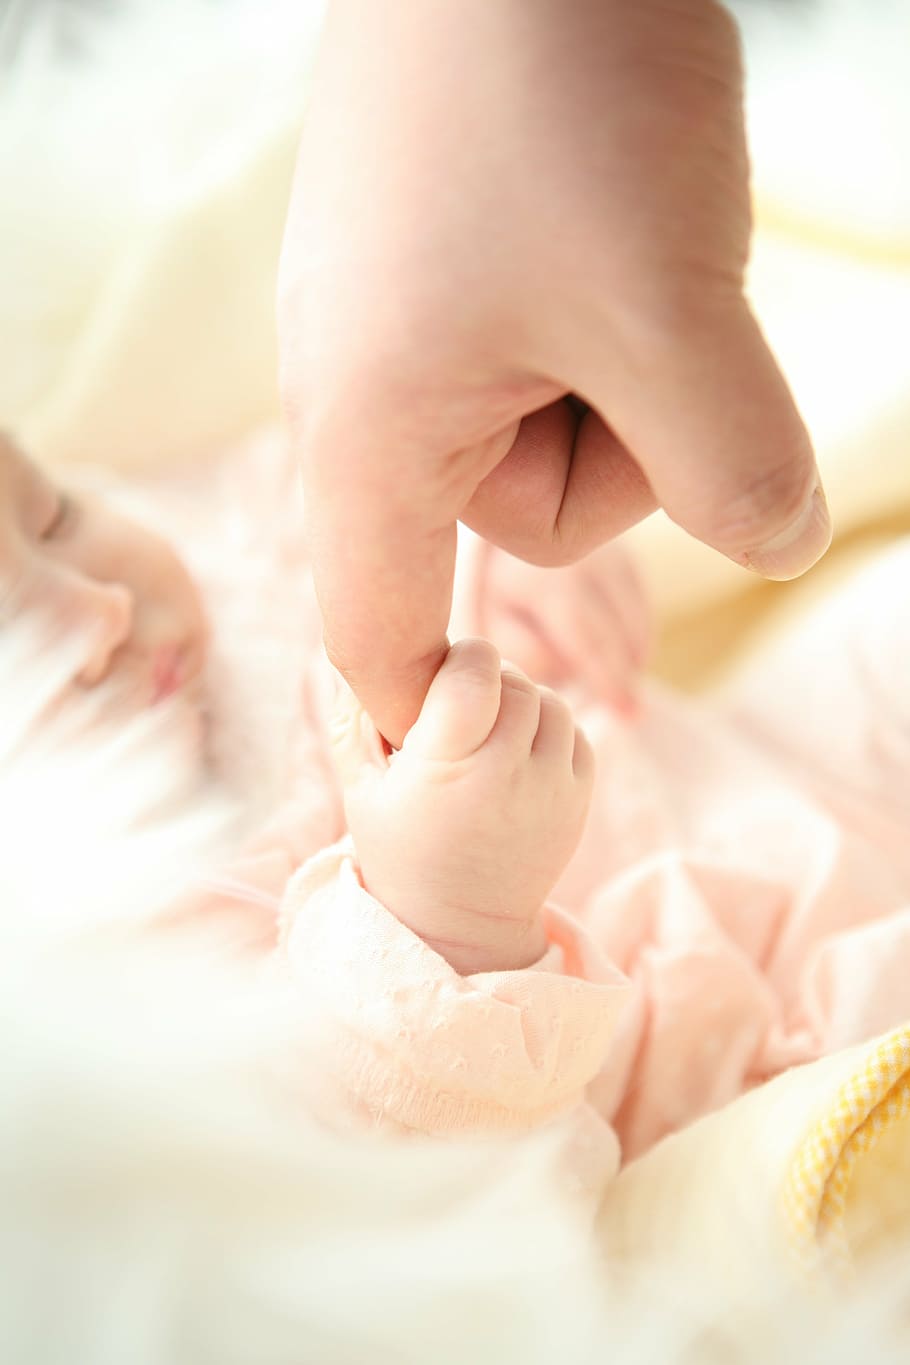 baby, holding, index finger, person, hand, dad, child, human Hand, close-up, small